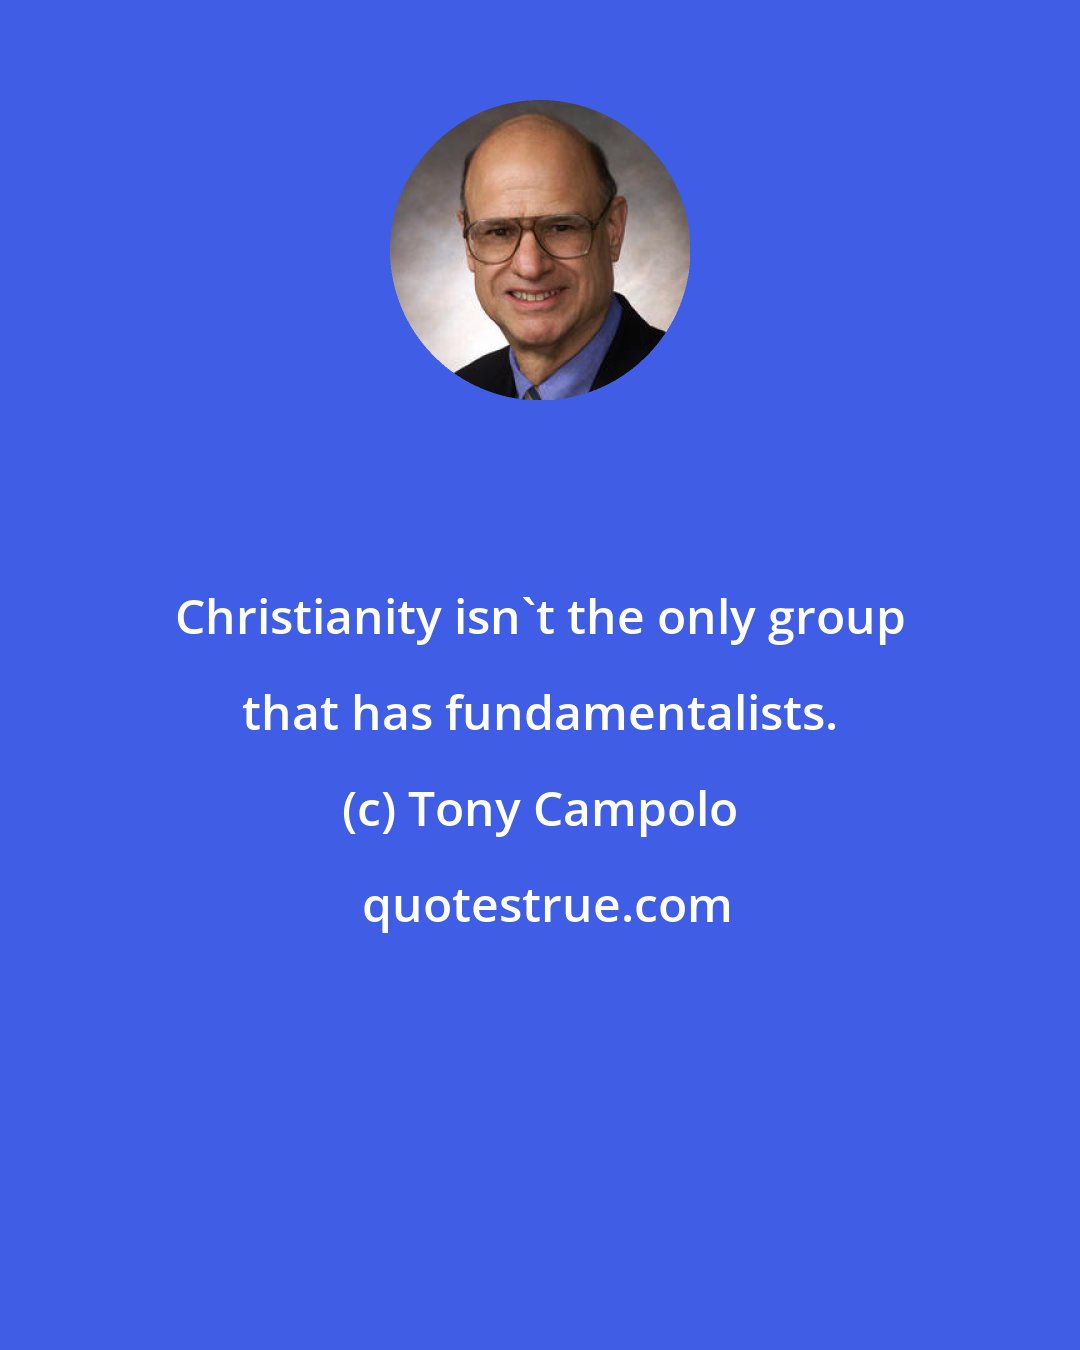 Tony Campolo: Christianity isn't the only group that has fundamentalists.